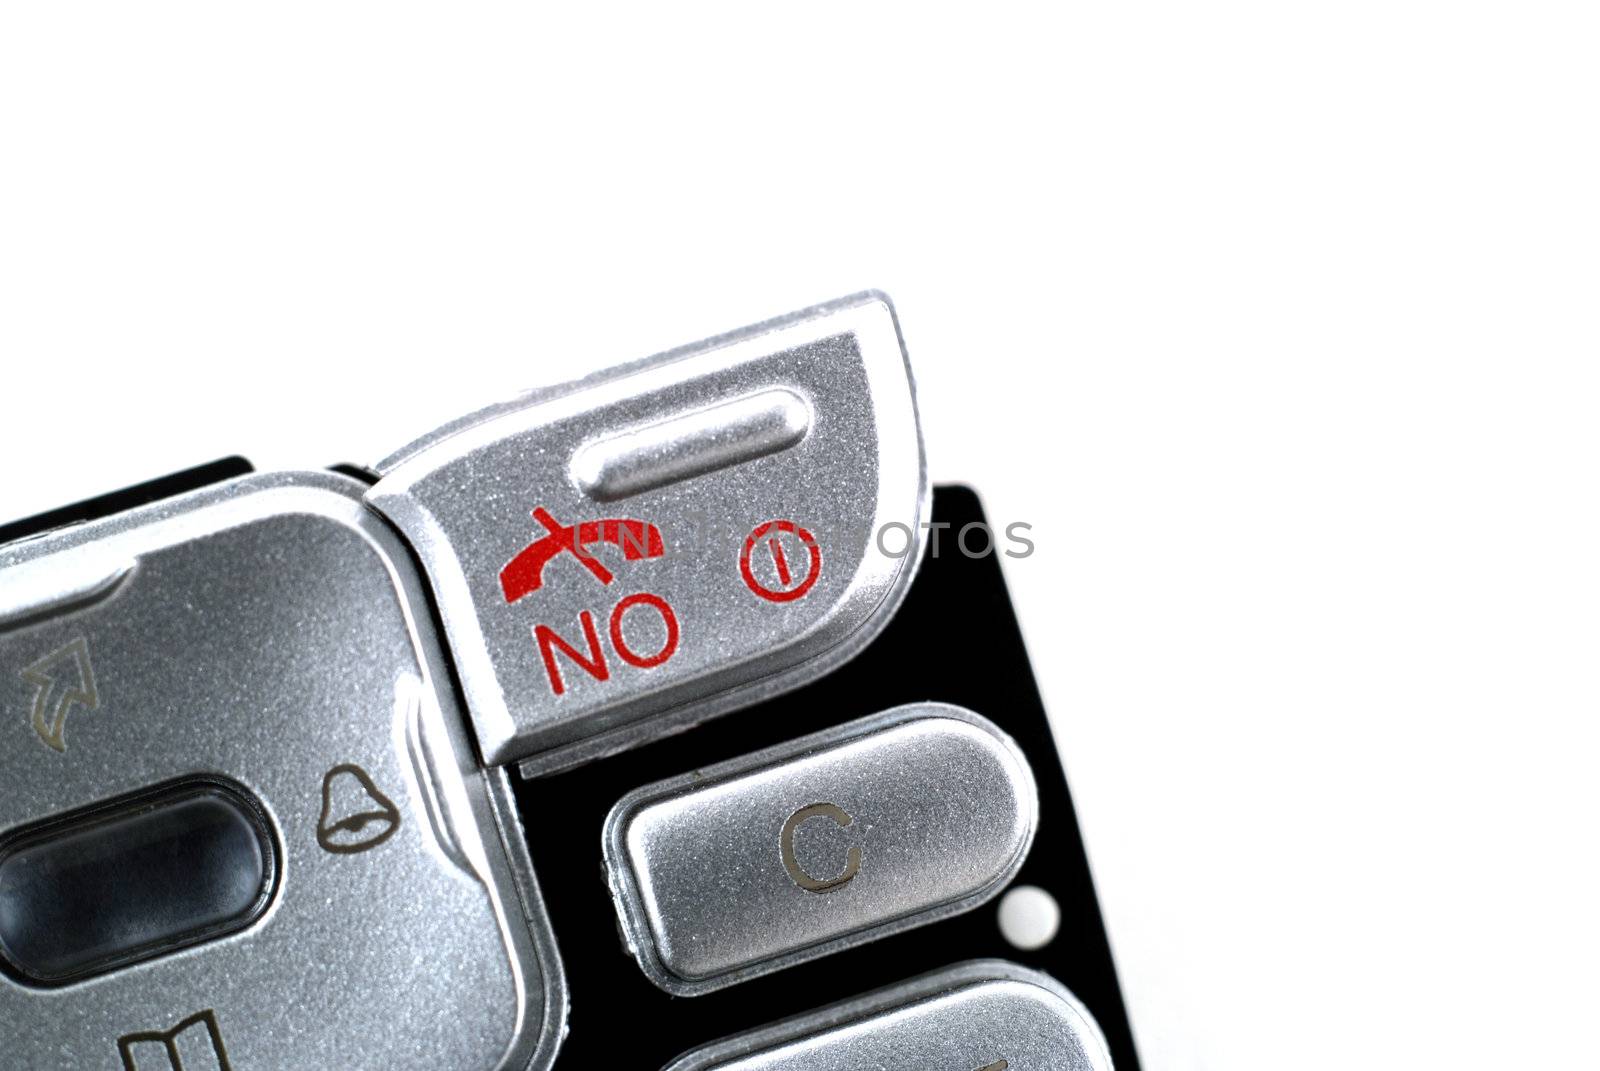 stock photography of the keypad found on phones